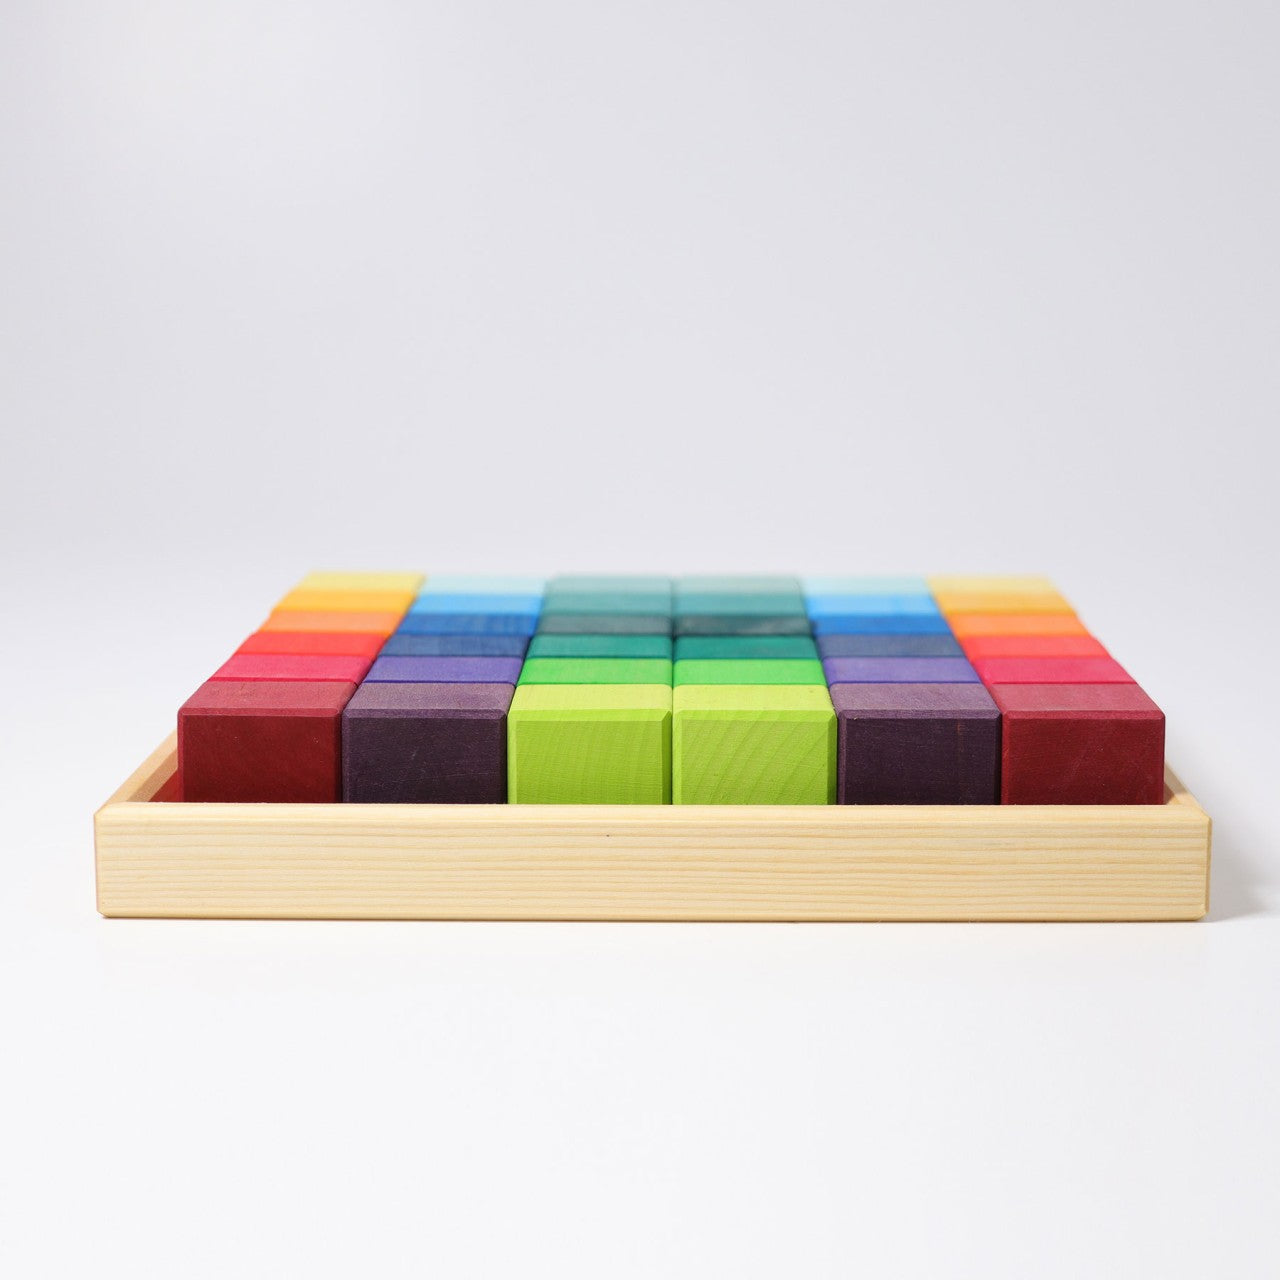 Rainbow Mosaic | Building Set | Wooden Toys for Kids | Open-Ended Play